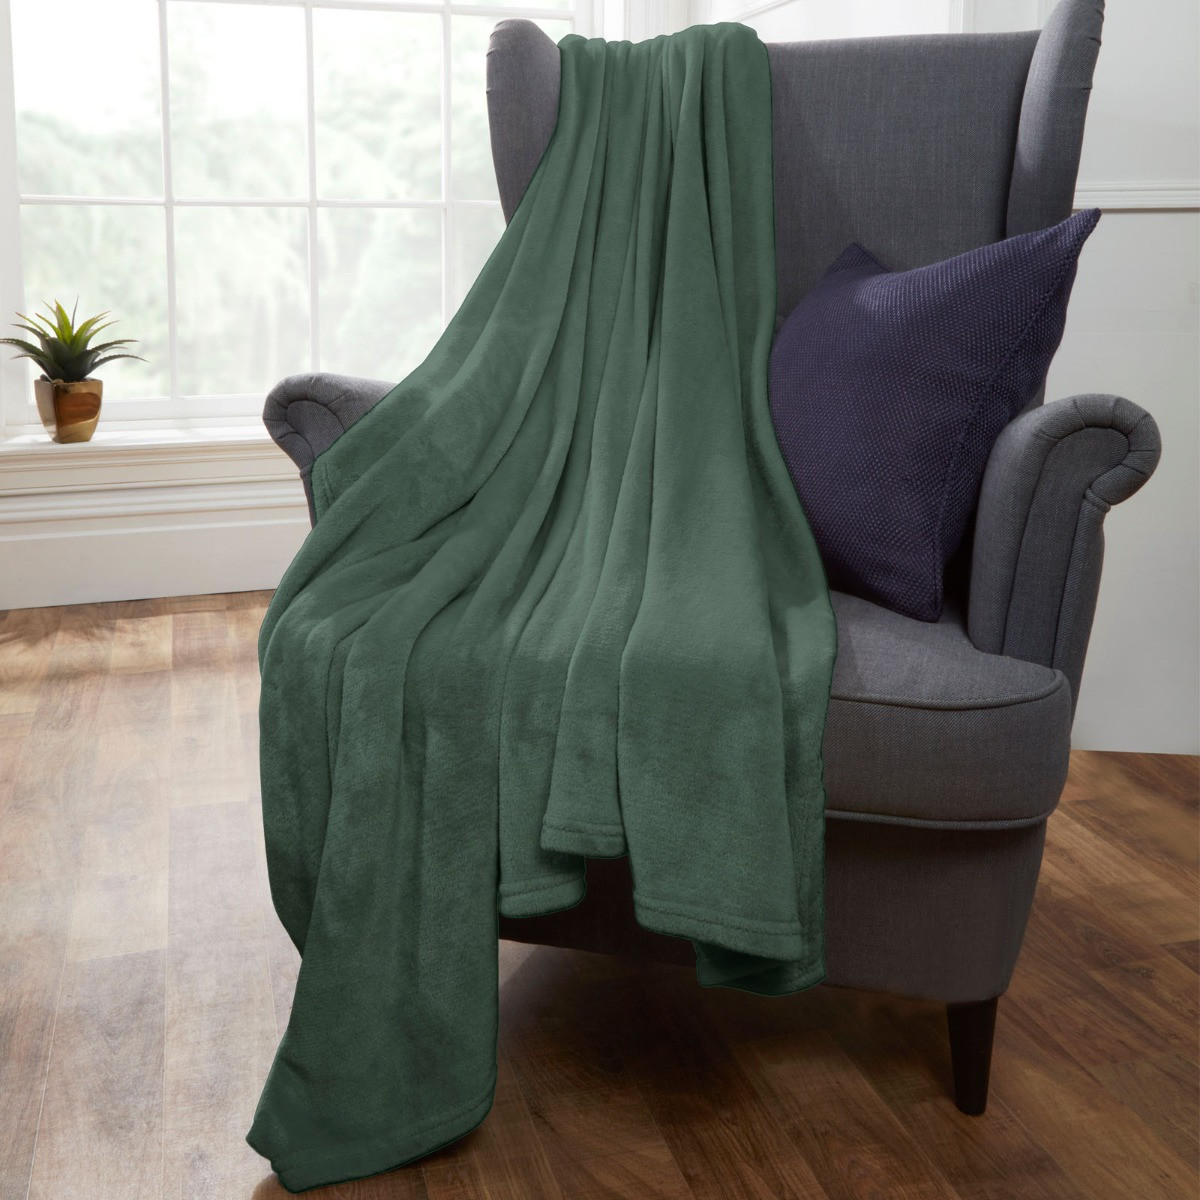 Brentfords by OHS Supersoft Throw Blanket, Green - 50 x 60 inches>